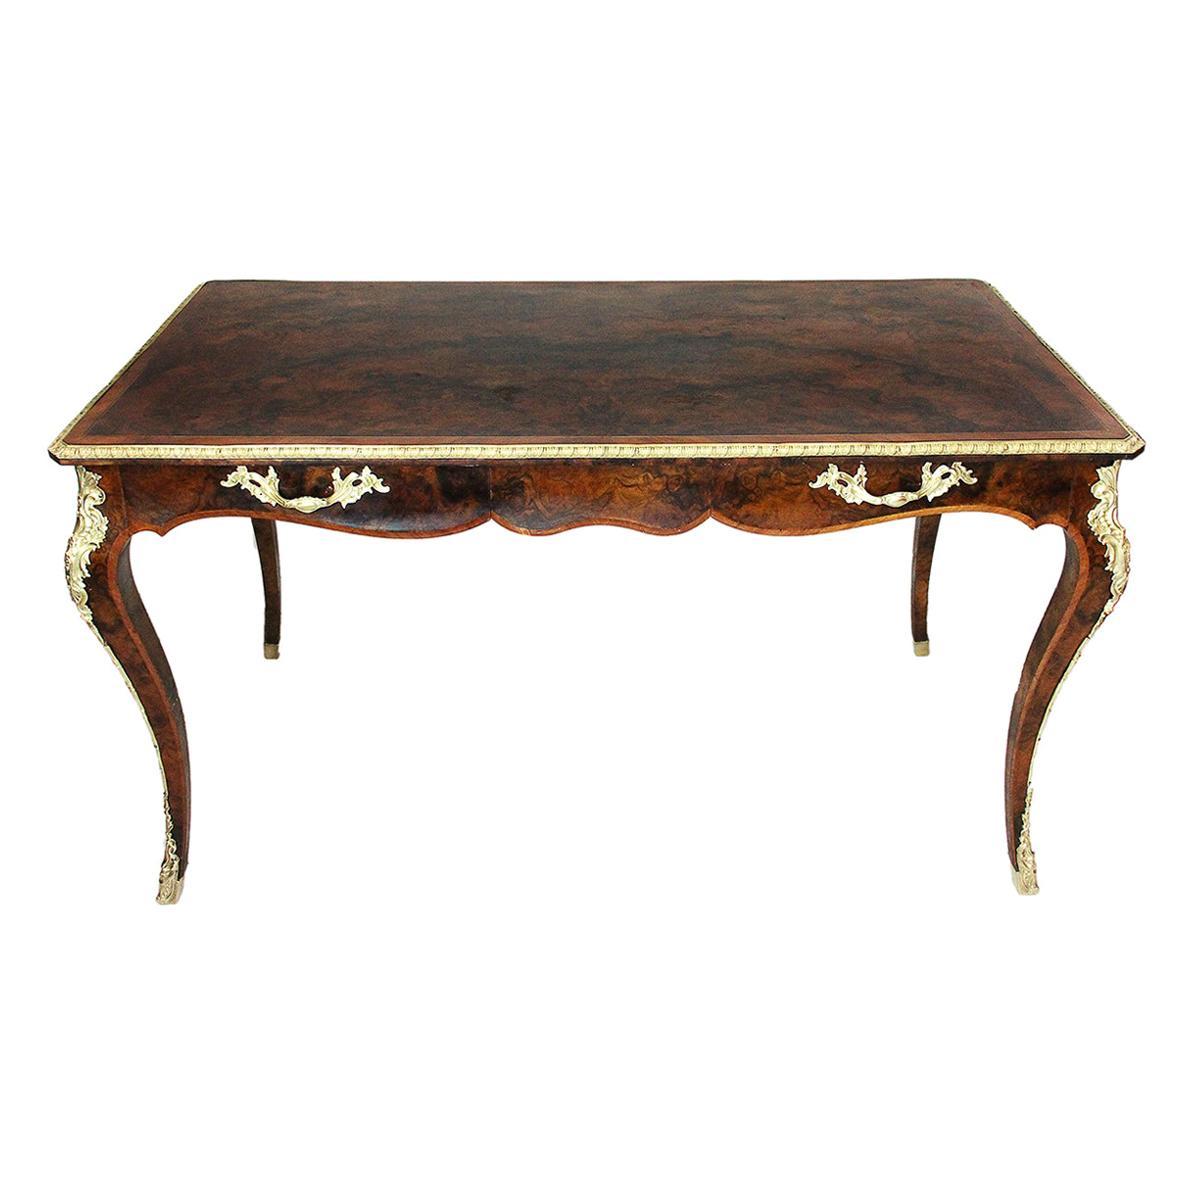 19th Century Desk stamp Howard & Sons in burr walnut and gilt bronze ornaments